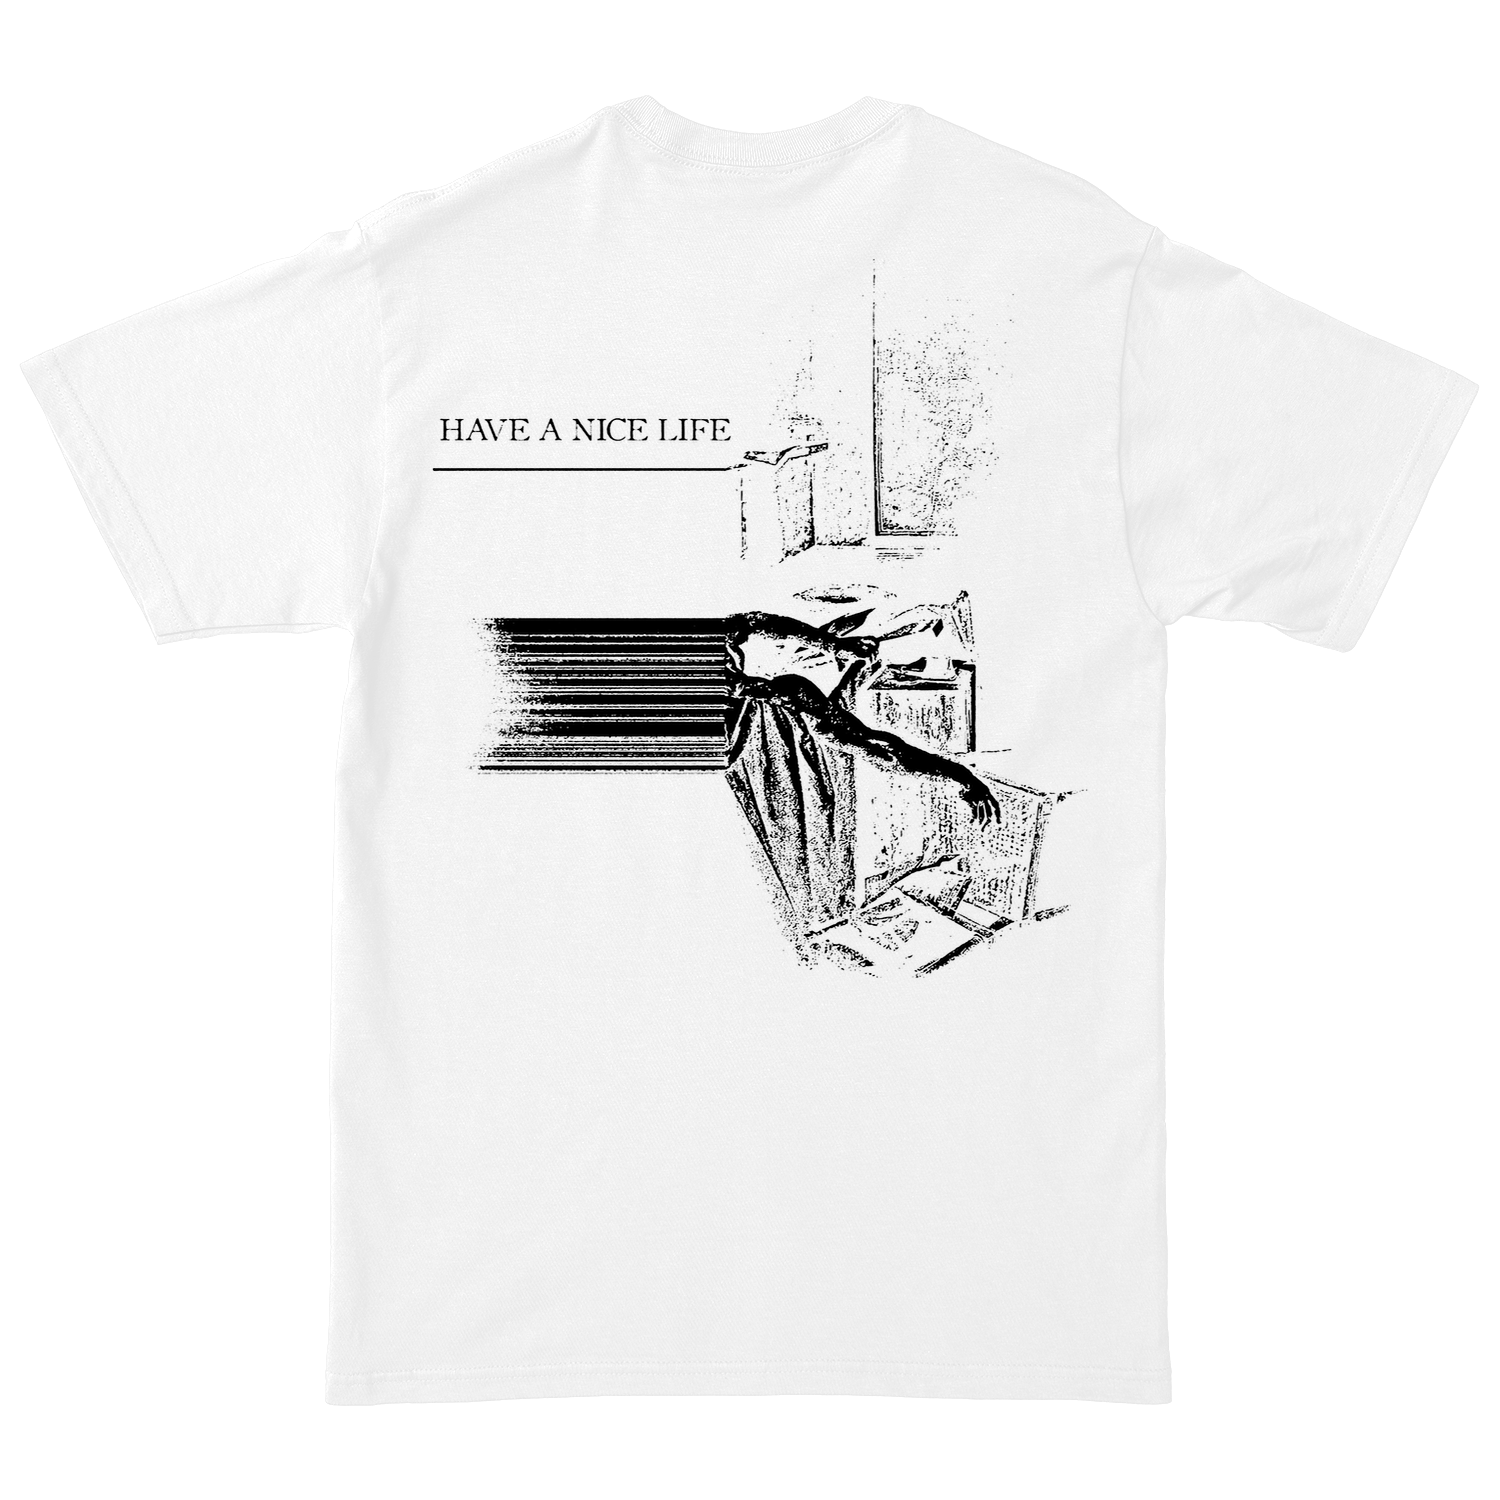 HAVE A NICE LIFE "Voids" White T-Shirt